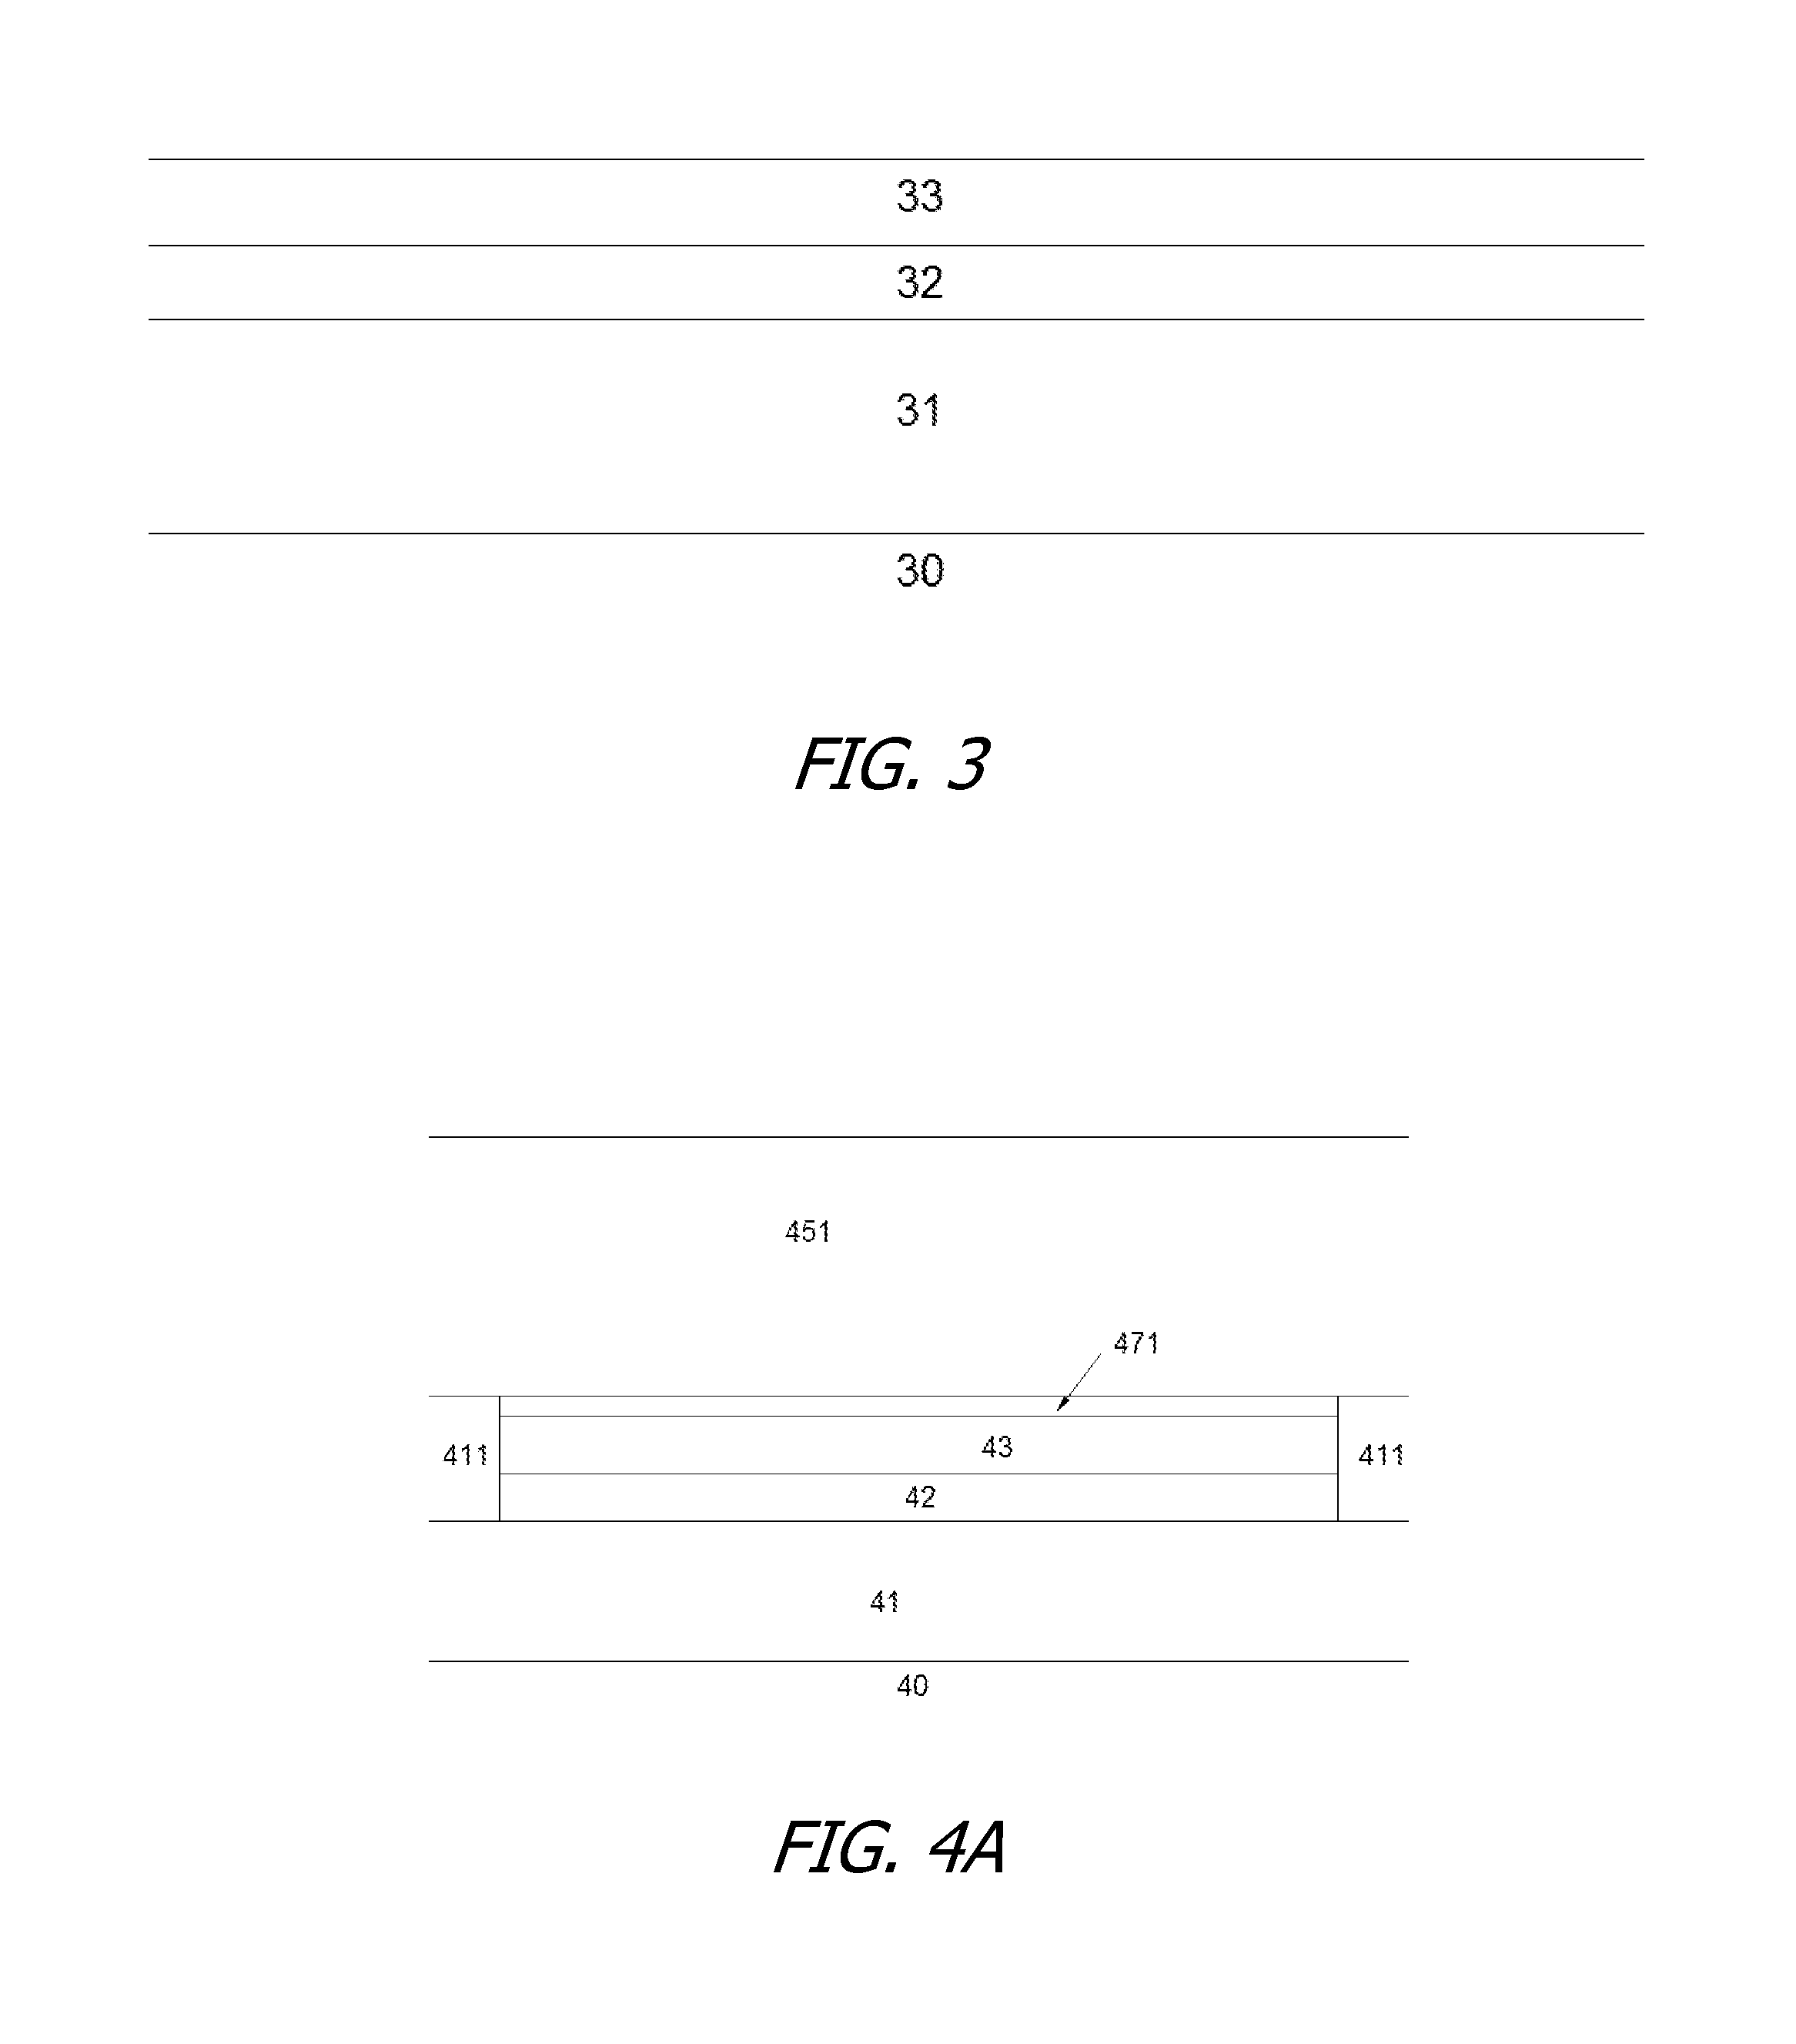 Gate Recessed FDSOI Transistor with Sandwich of Active and Etch Control Layers